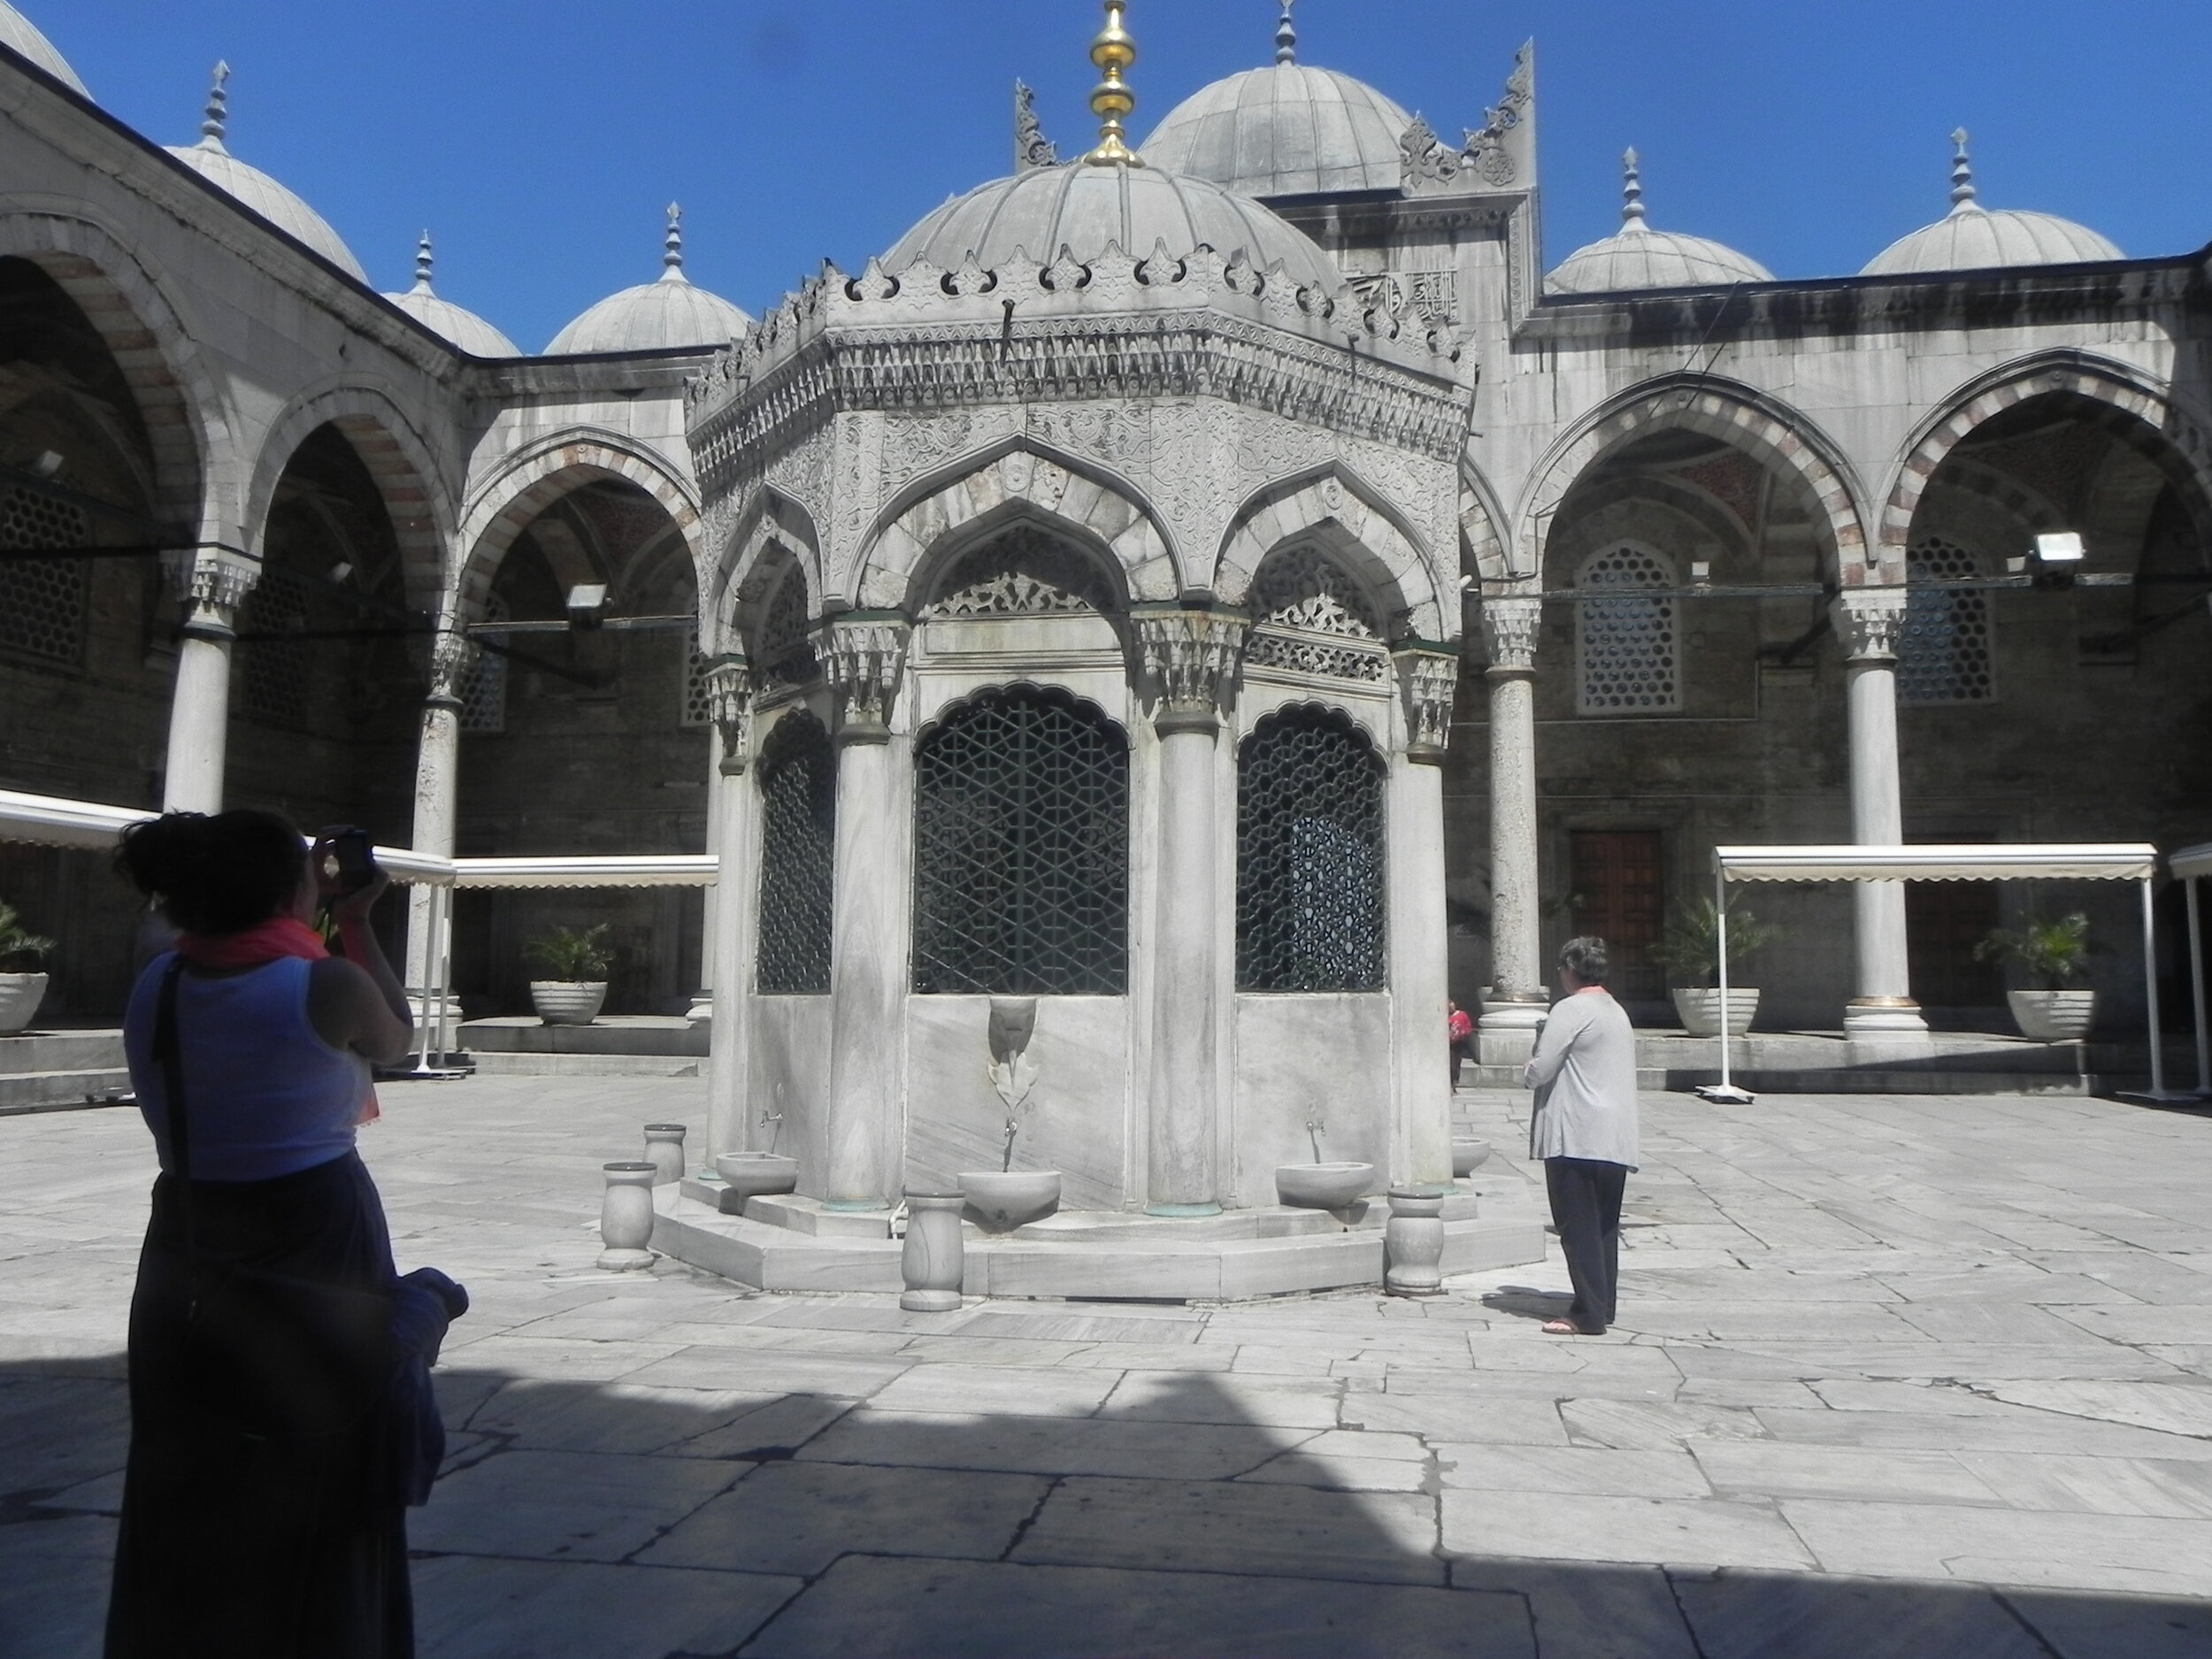  Courtyard of the New Mosque 